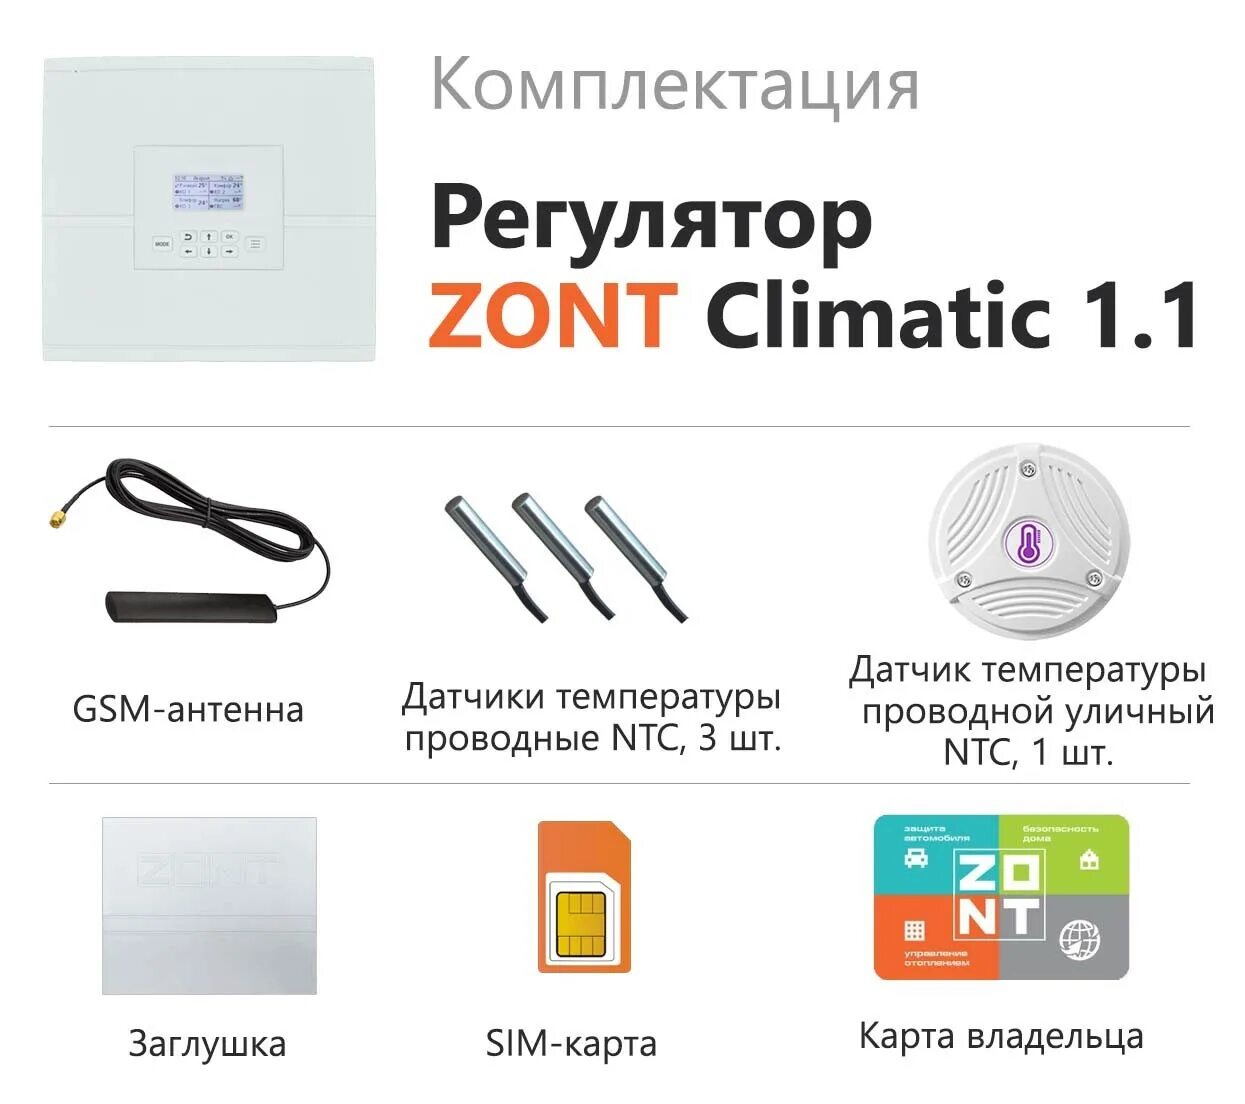 Zont карта. Zont климатик 1.3. Zont climatic 1.2. Zont climatic 1.3 автоматический регулятор. Автоматический регулятор Zont climatic 1.2.